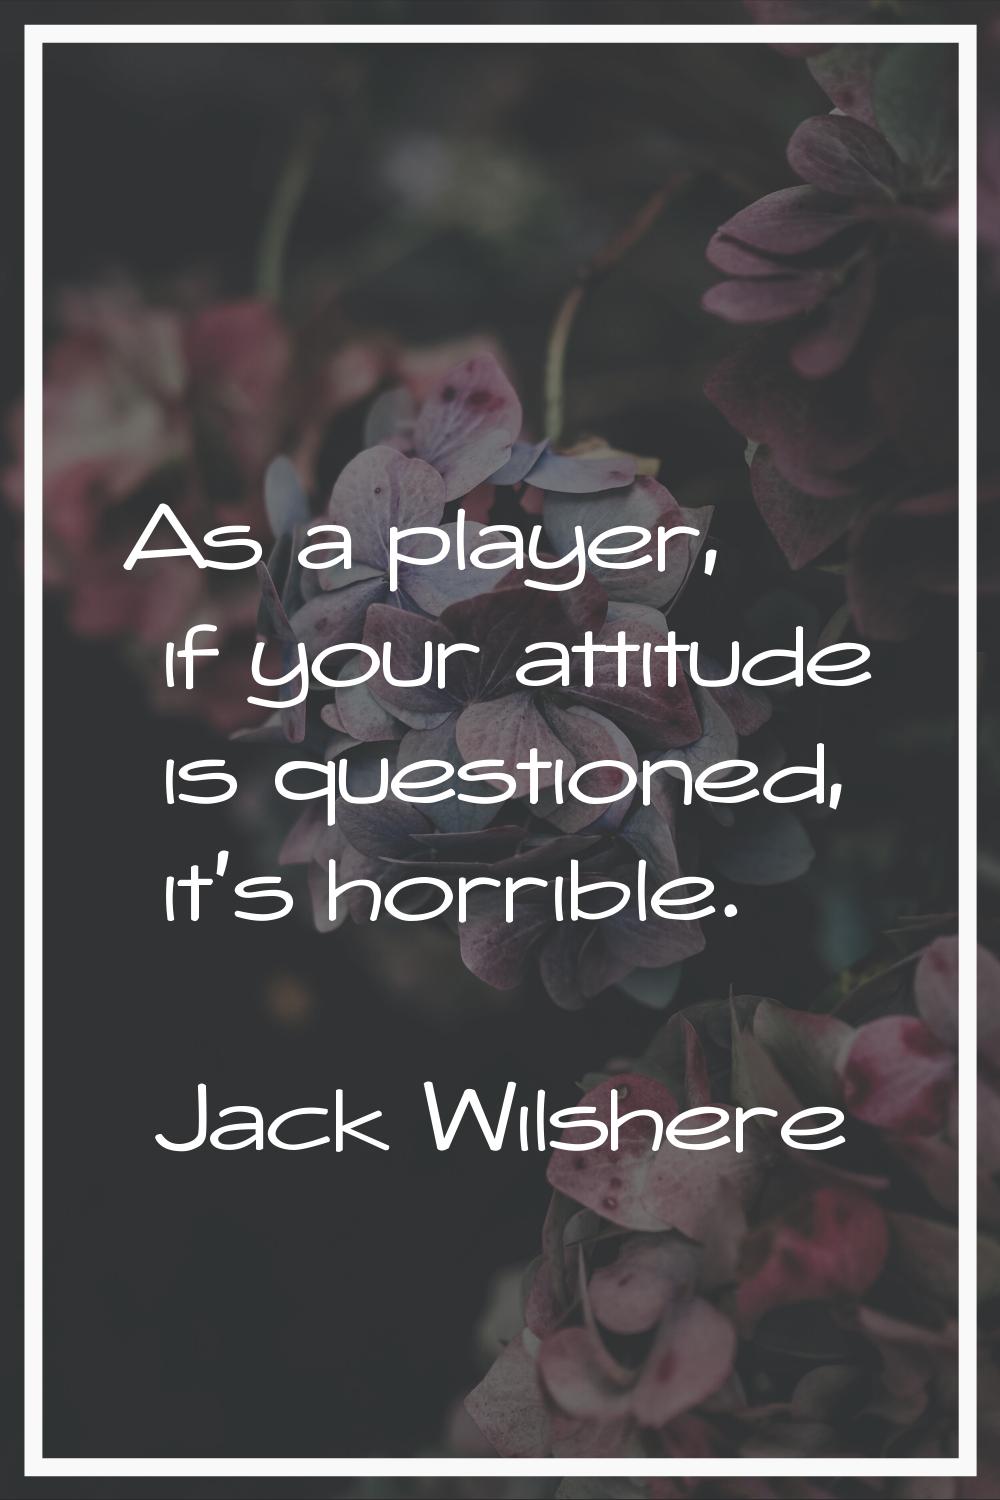 As a player, if your attitude is questioned, it's horrible.